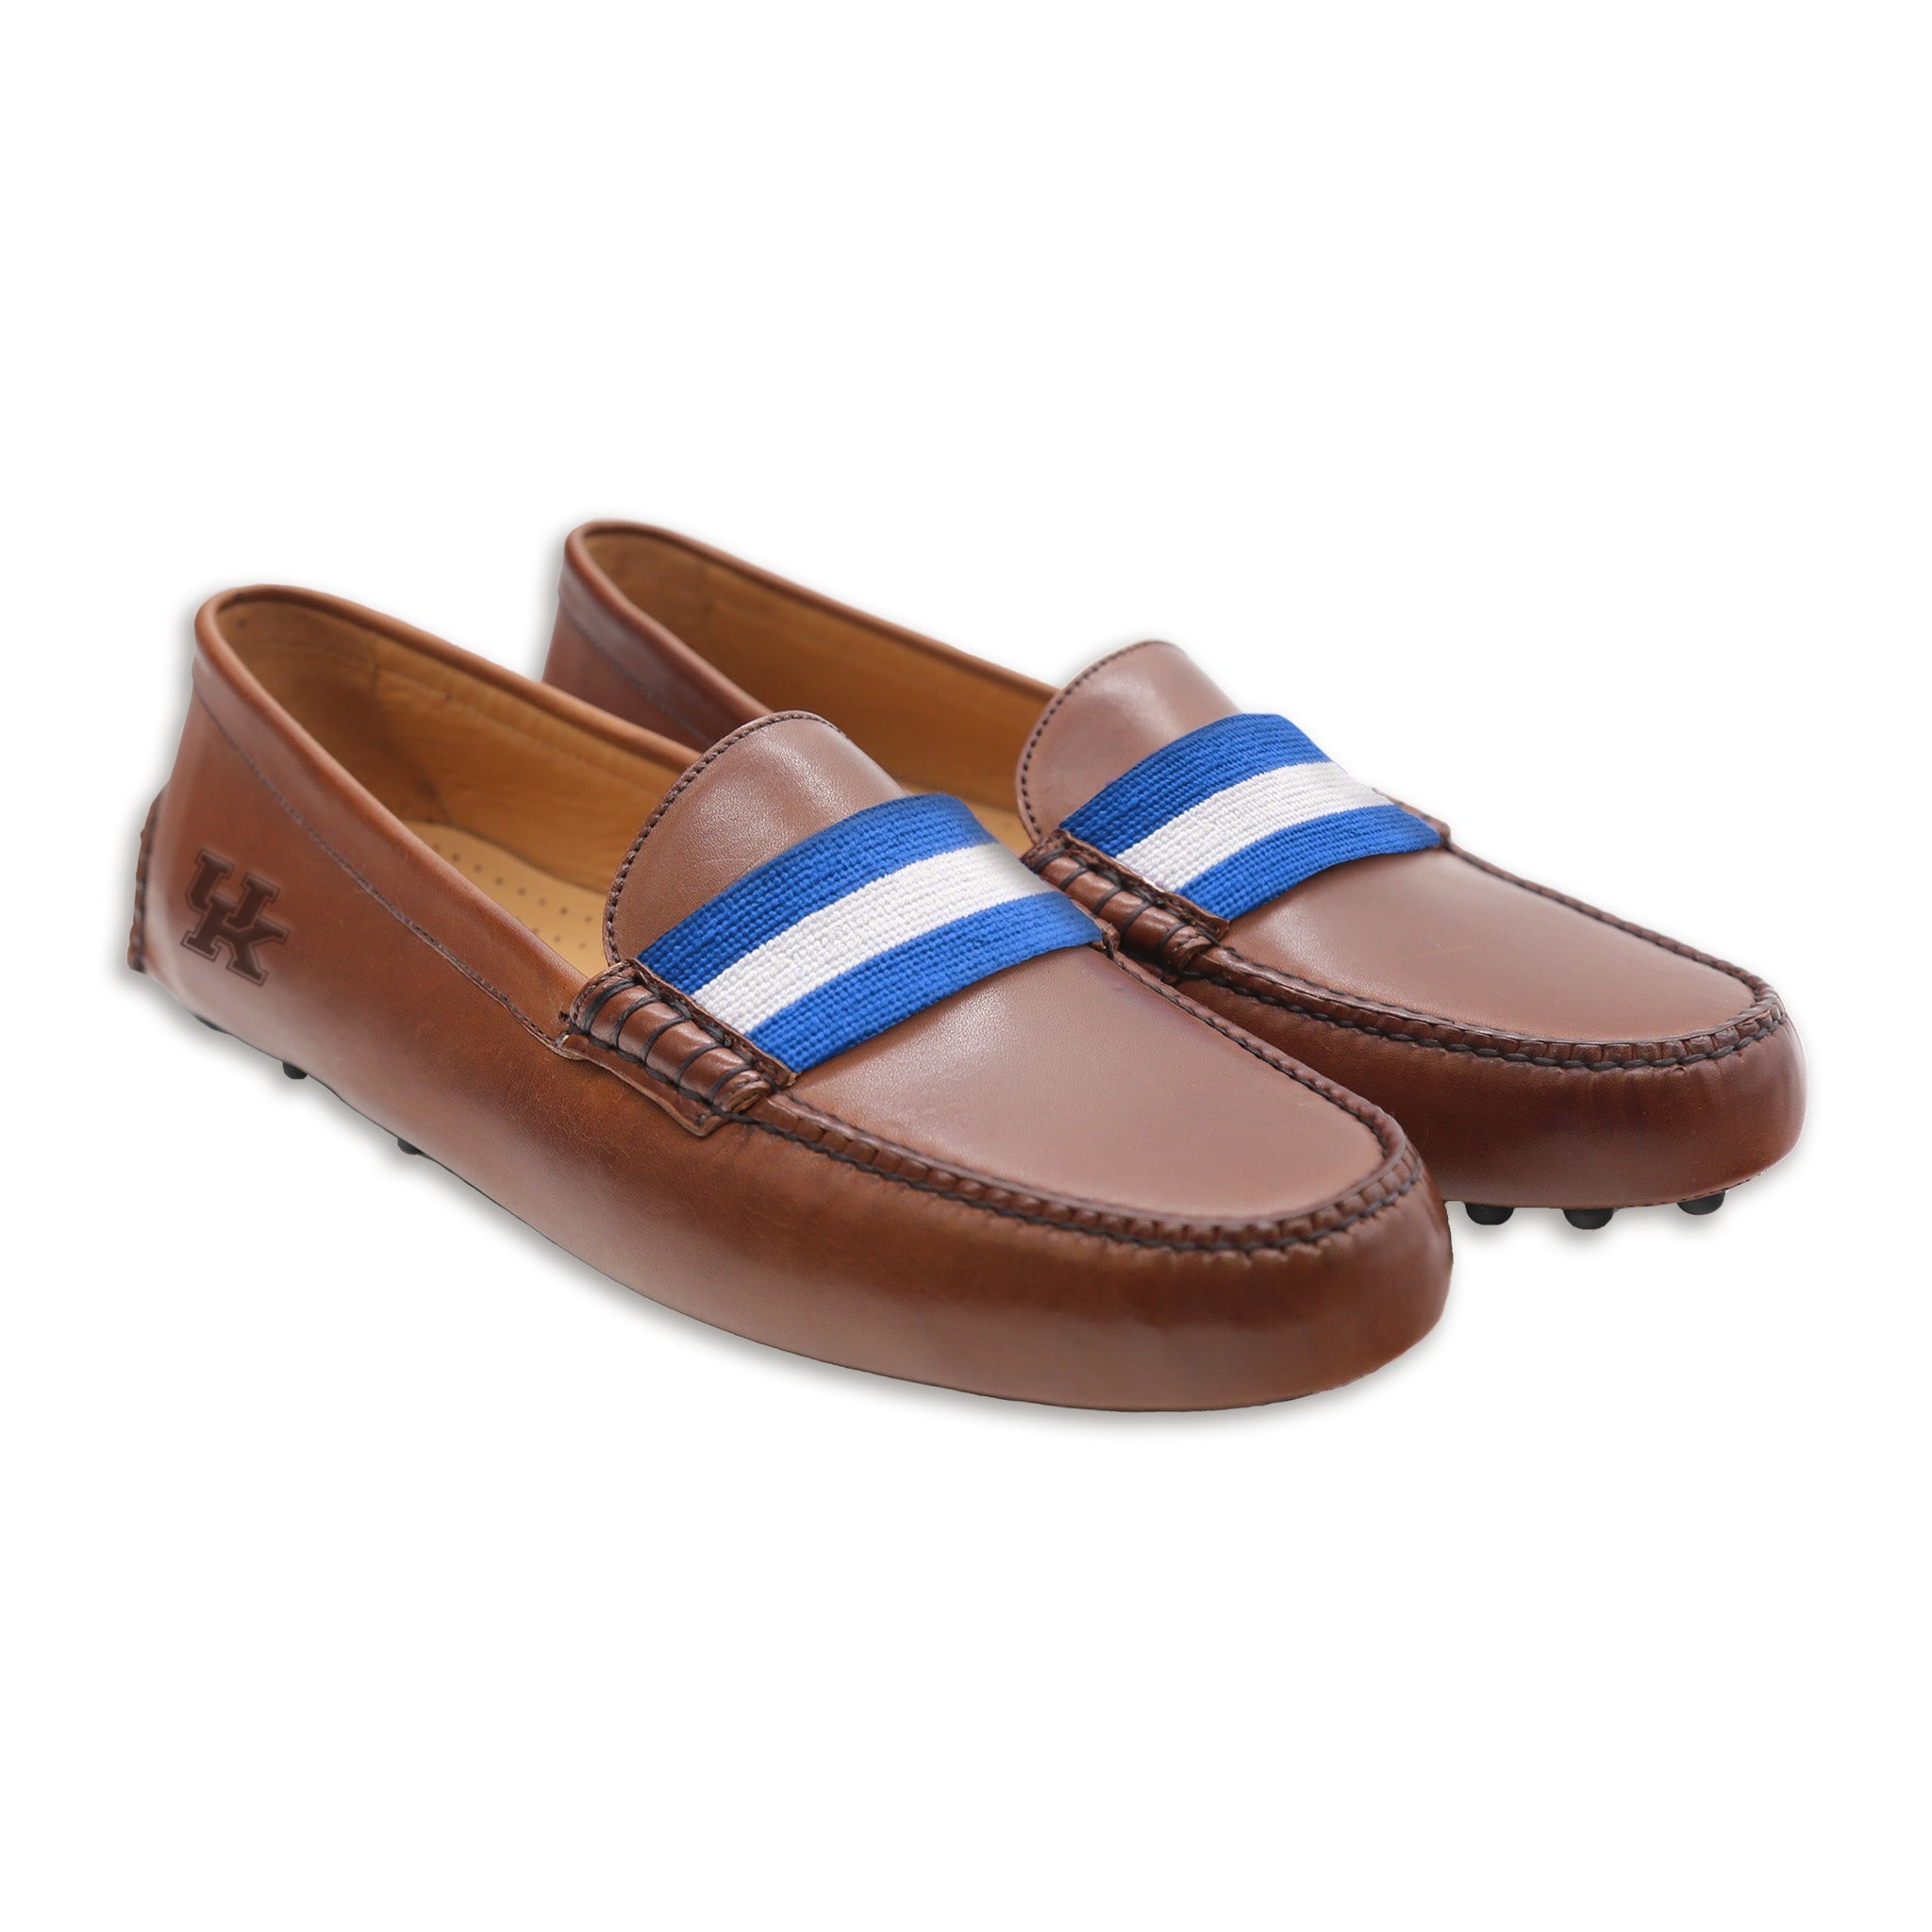 Kentucky Surcingle Driving Leather-Logo) (Chestnut – Smathers Branson (Blue-White) Shoes 